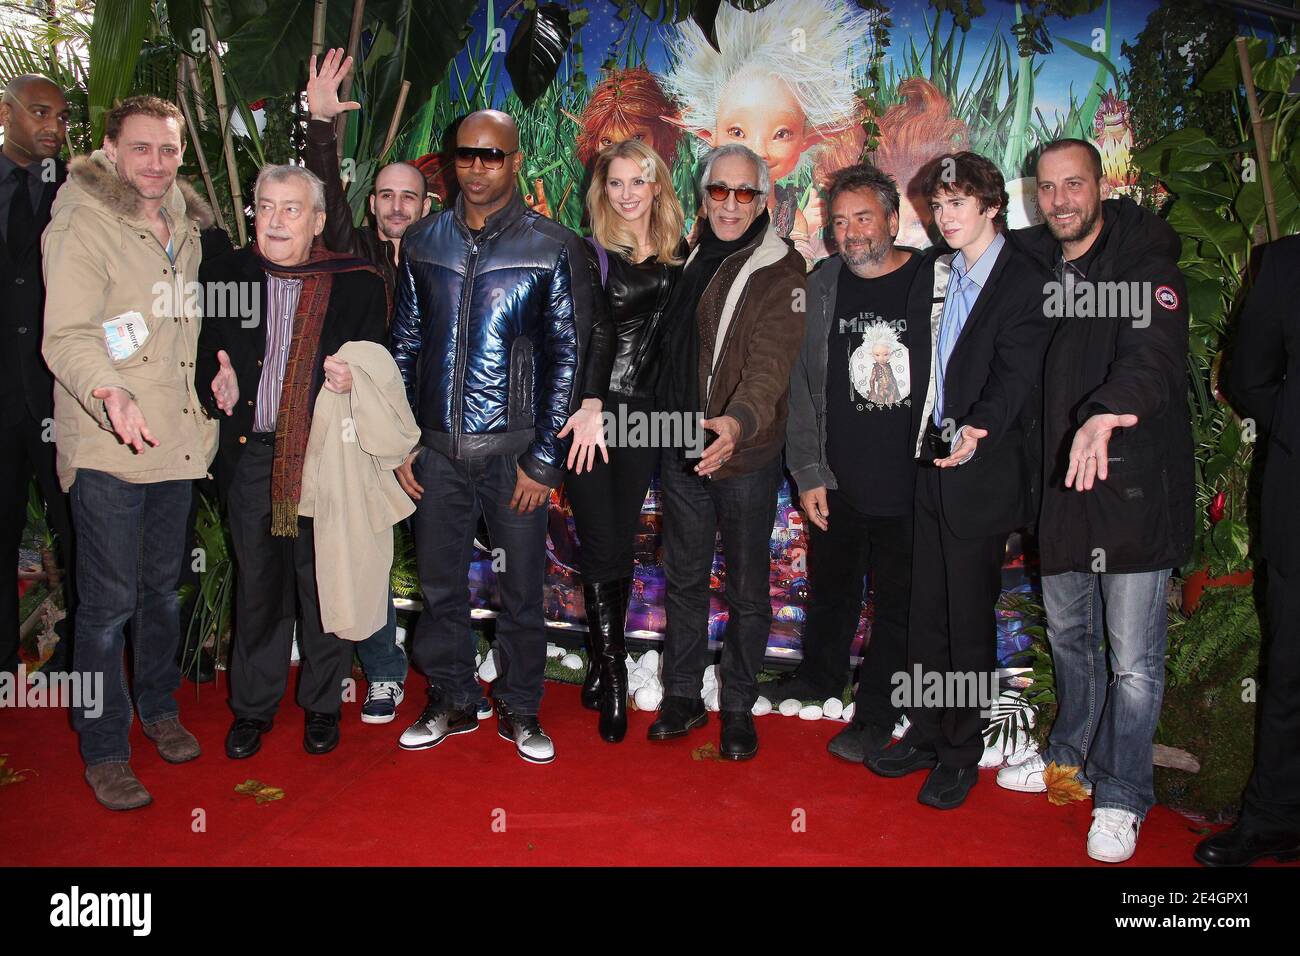 Cast members (L toR) Jean-Paul Rouve, Michel Duchaussoy, Frederique Bel, Gerard Darmon, French Producer and Director Luc Besson, Freddie Highmore and Fred Testo arriving to the premiere of 'Arthur et la Vengeance de Maltazard' at Gaumont Marignan theater in Paris, France on November 22, 2009. Photo by Denis Guignebourg/ABACAPRESS.COM Stock Photo